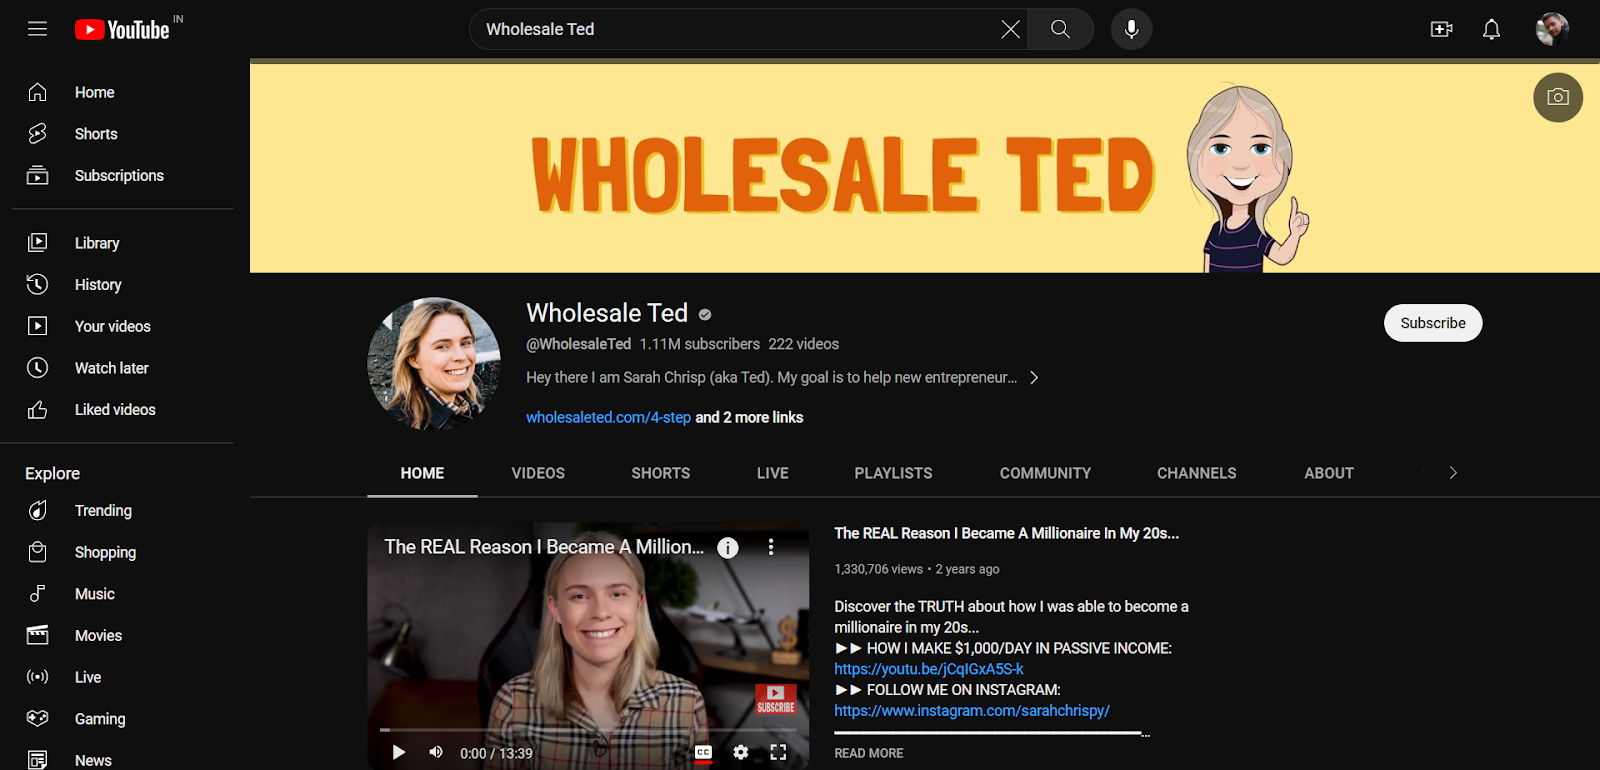 Wholesale Ted's YouTube channel